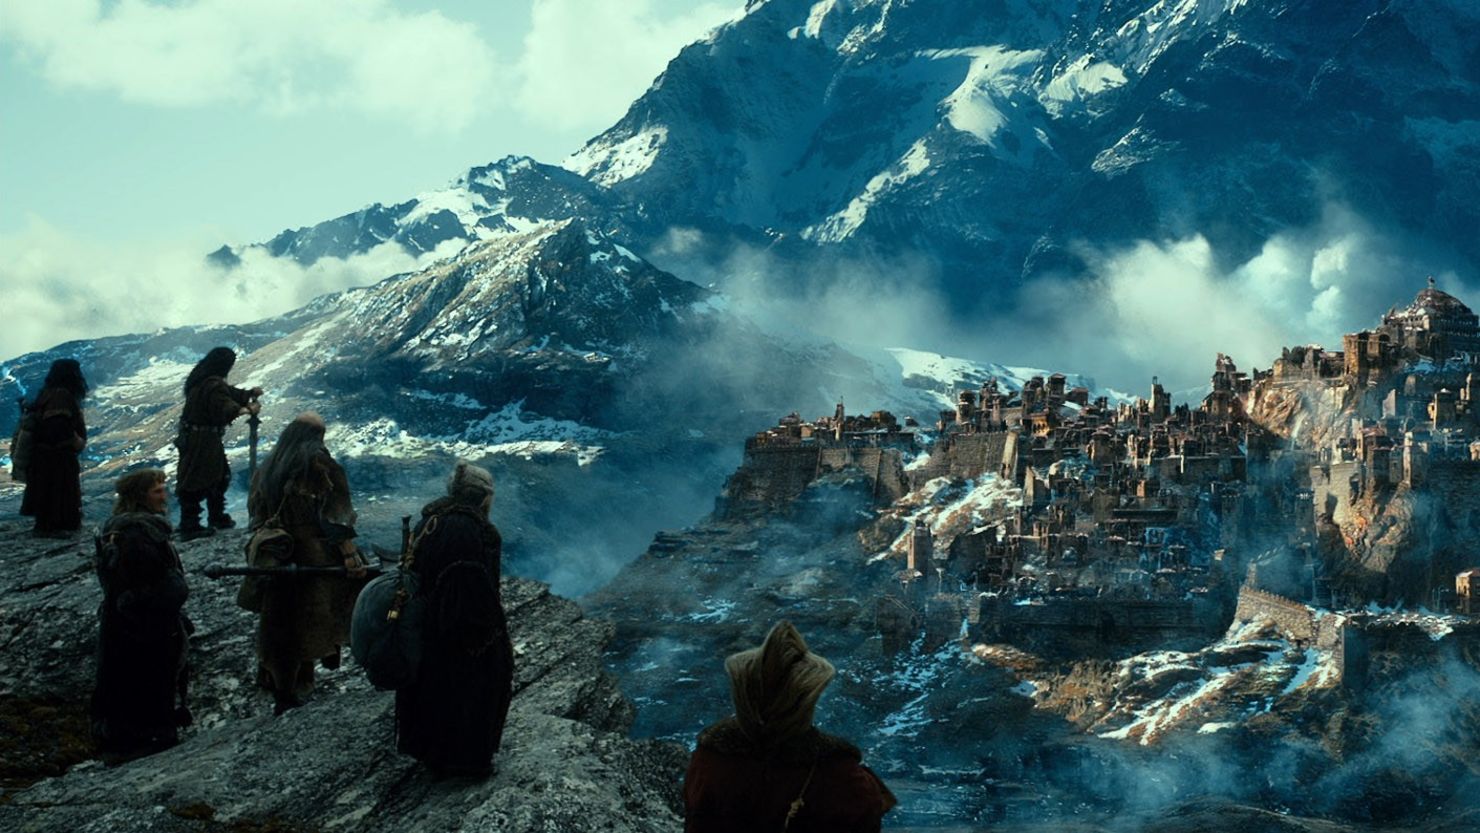 "The Hobbit: The Desolation of Smaug" stayed strong at the box office. 